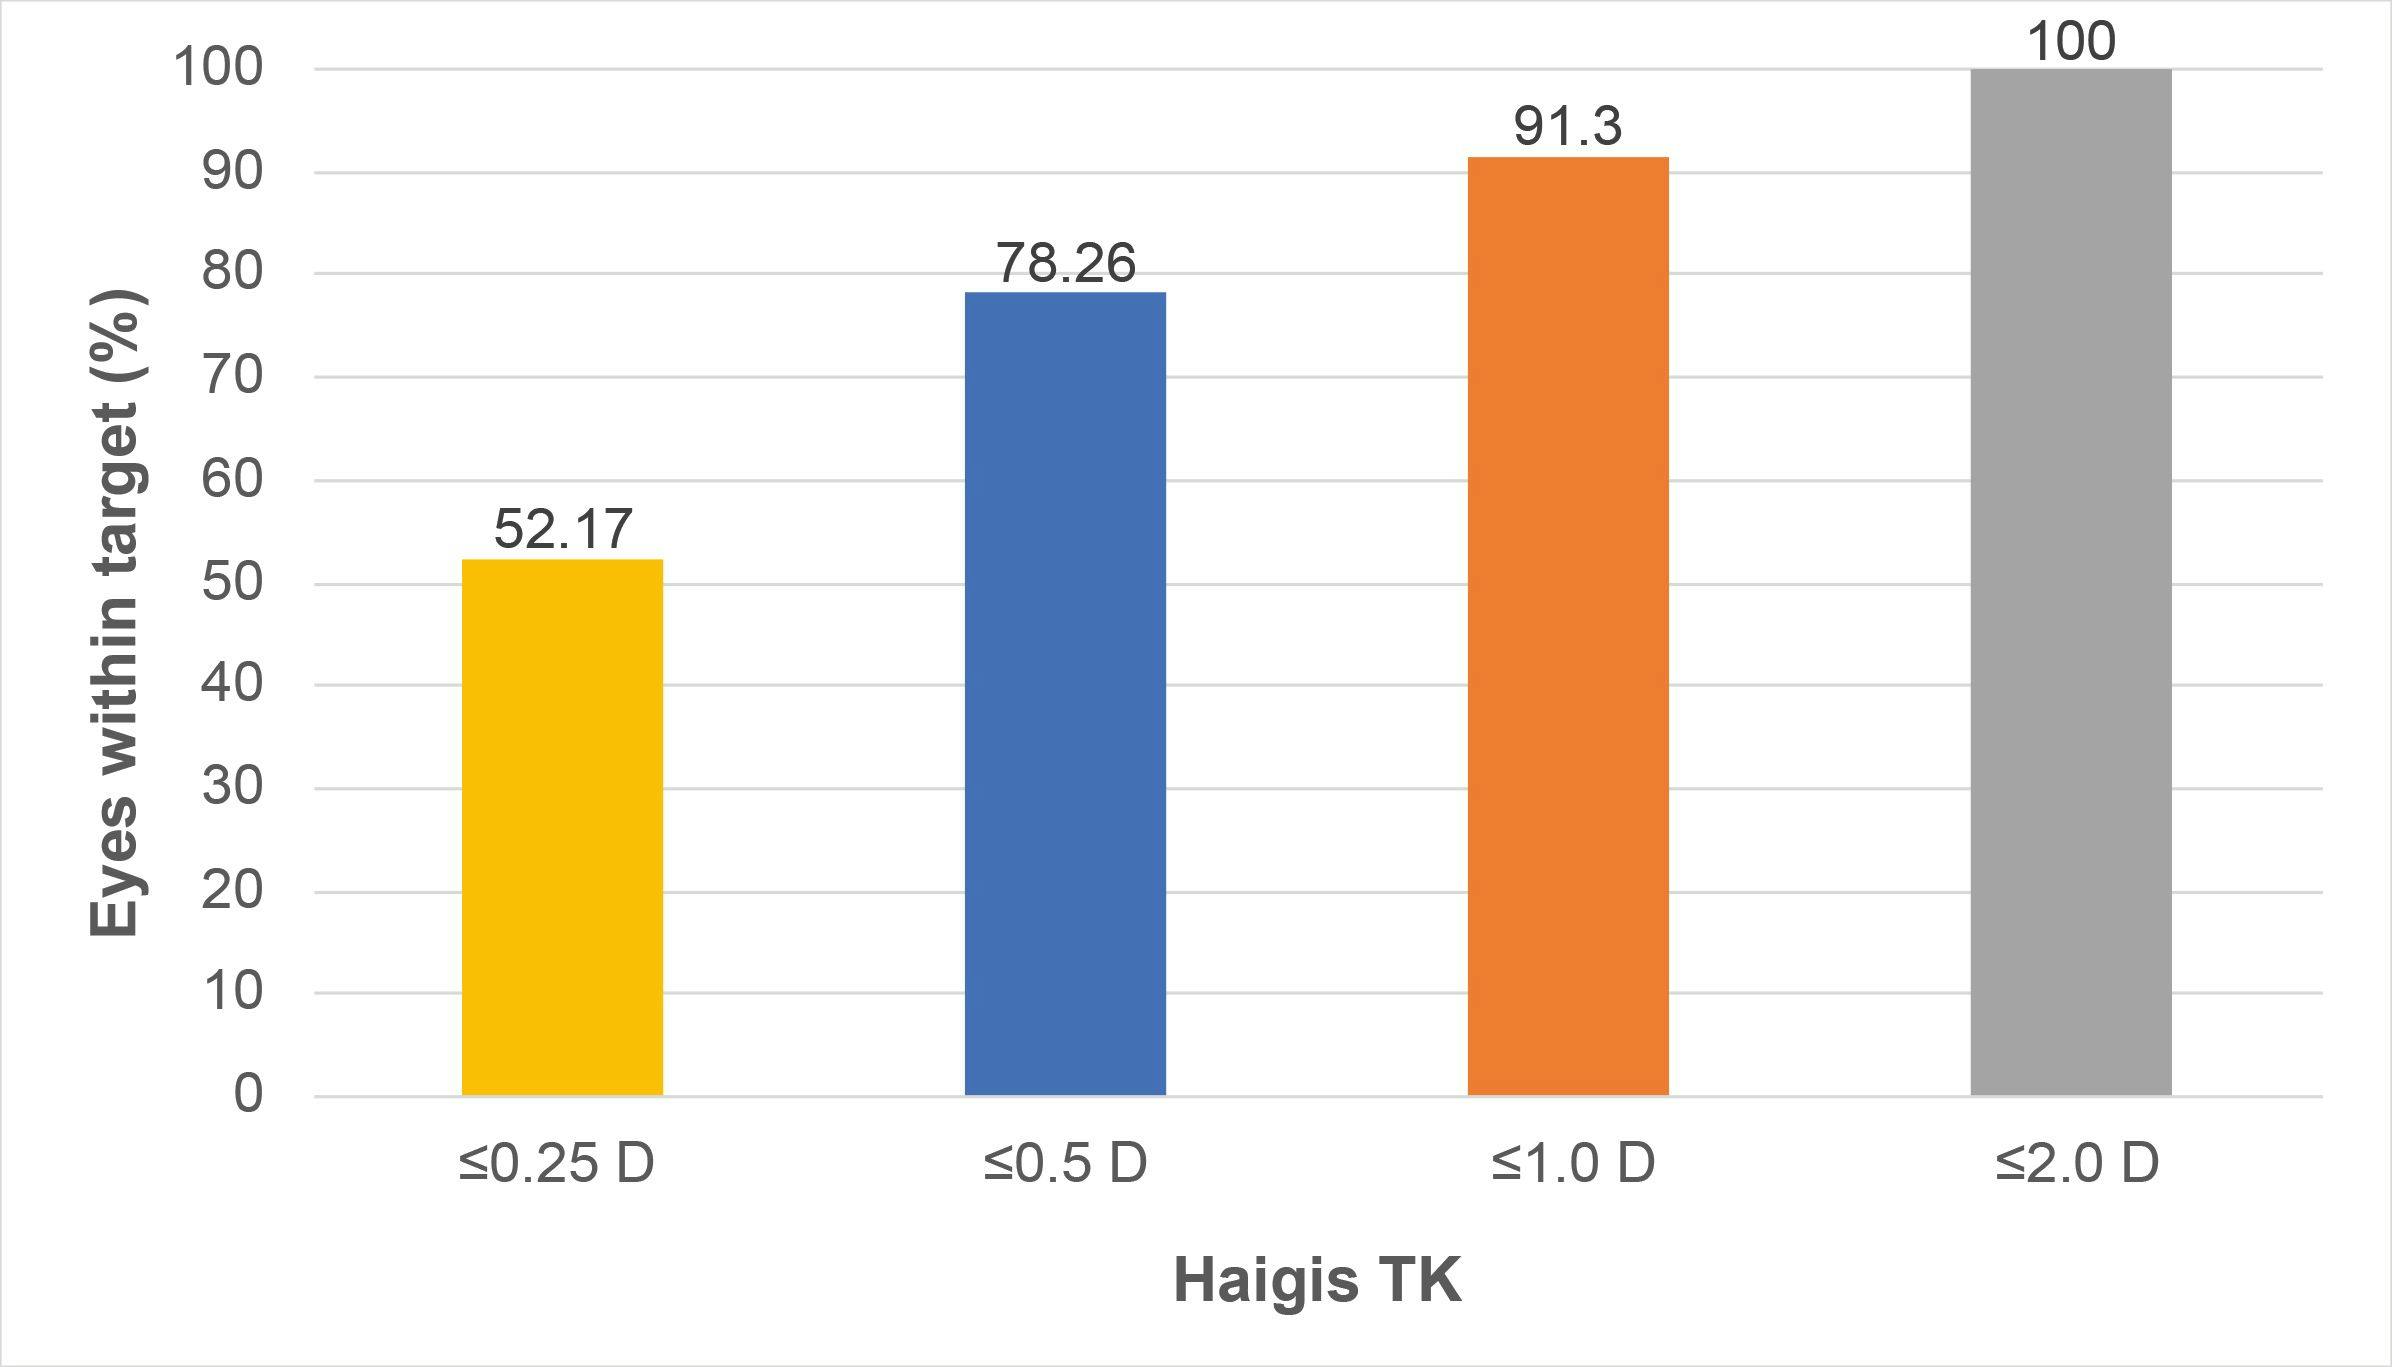 Figure 4 is a chart which shows the proportion of eyes that were within 0.25, 0.5, 1 and 2 D of target postoperative refraction when total keratometry (TK) values were used in the Haigis formula.